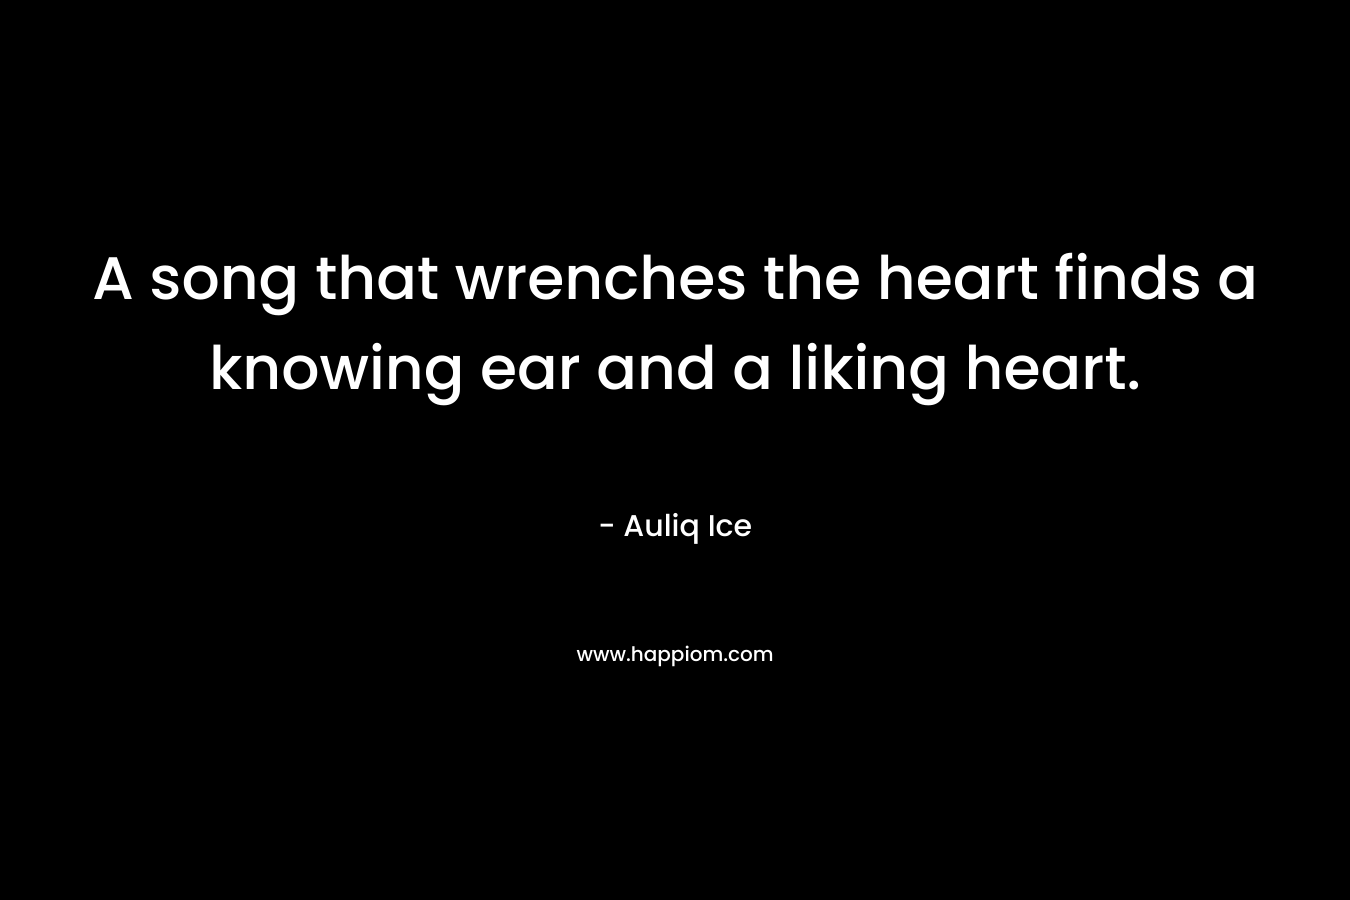 A song that wrenches the heart finds a knowing ear and a liking heart.